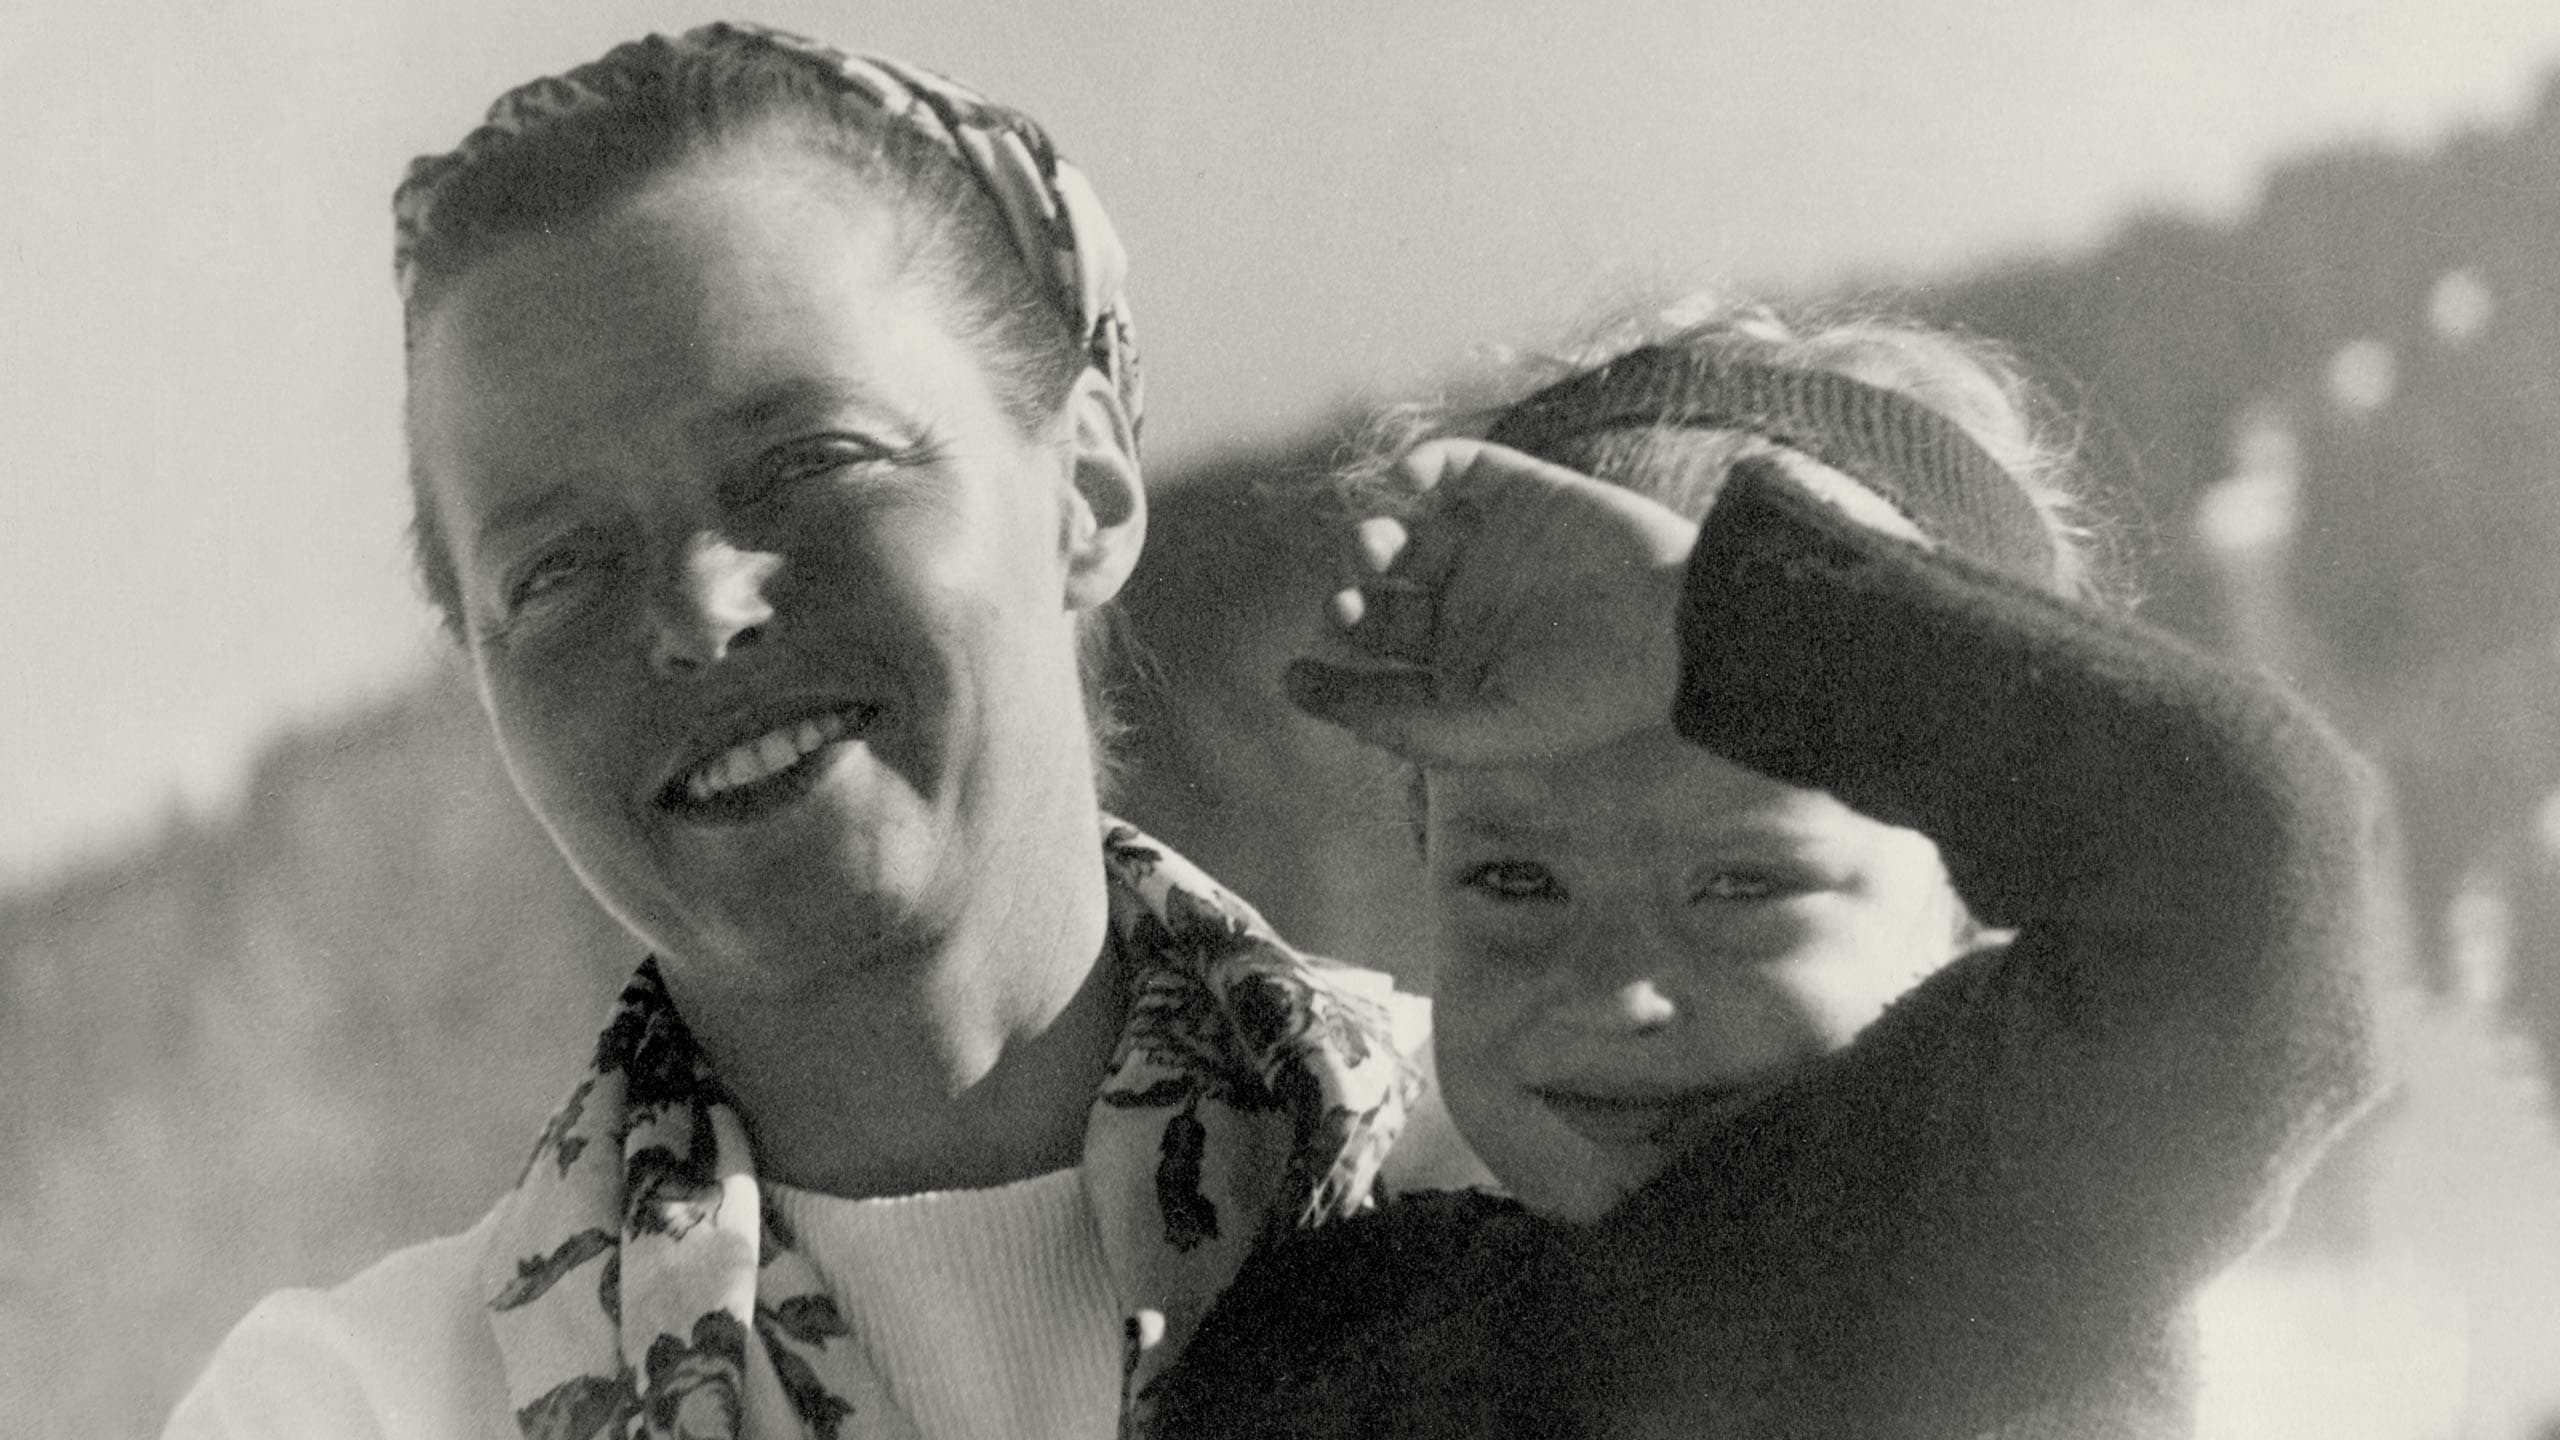 Charlotte Perriand smiling alongside a young Pernette Perriand.